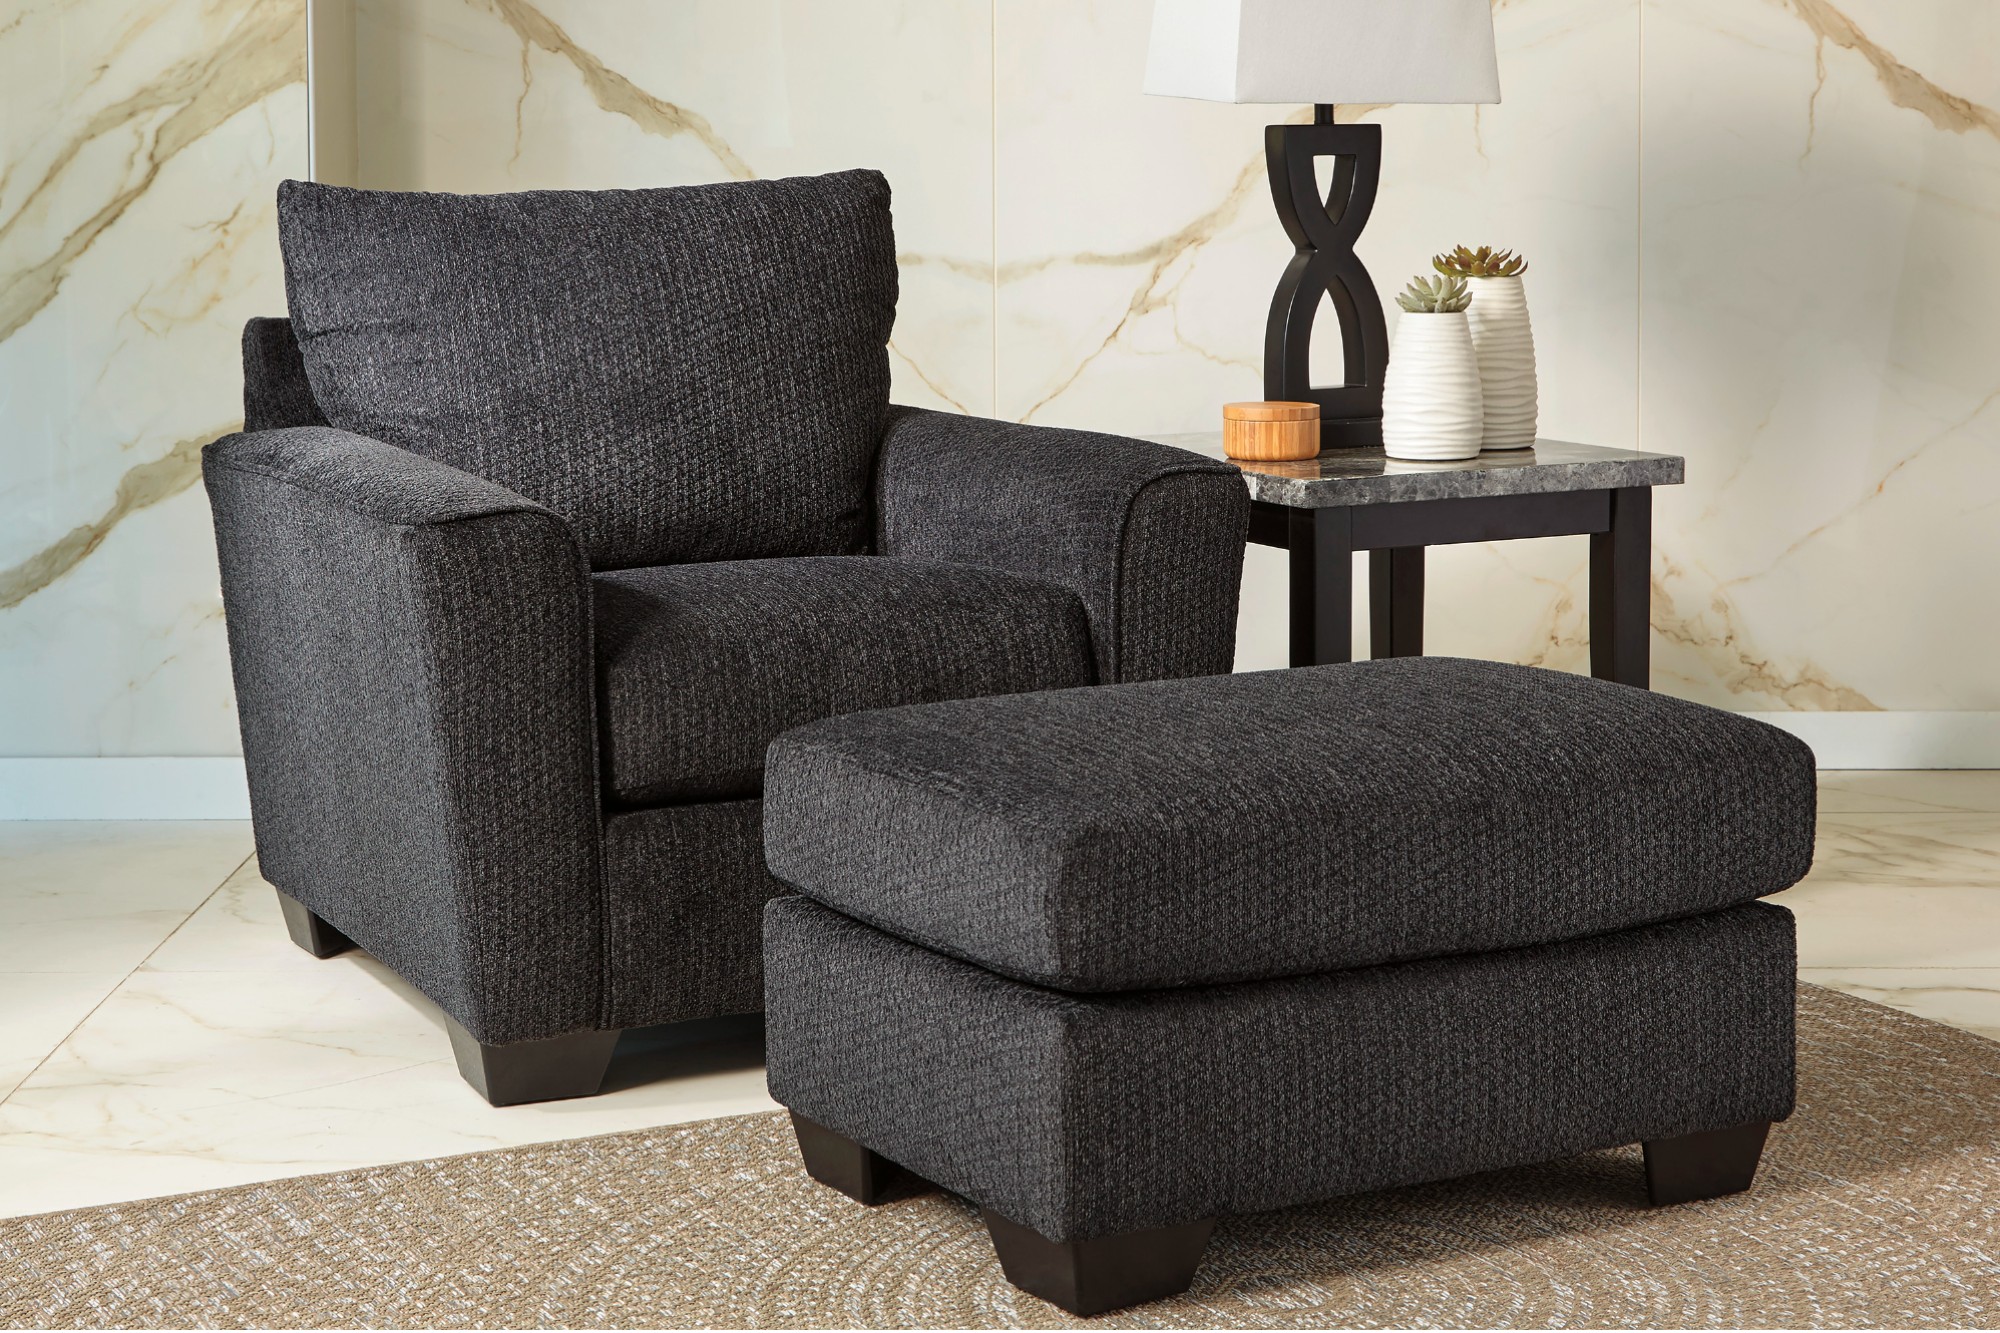 Dash Square furniture collection from Ashley Homestore